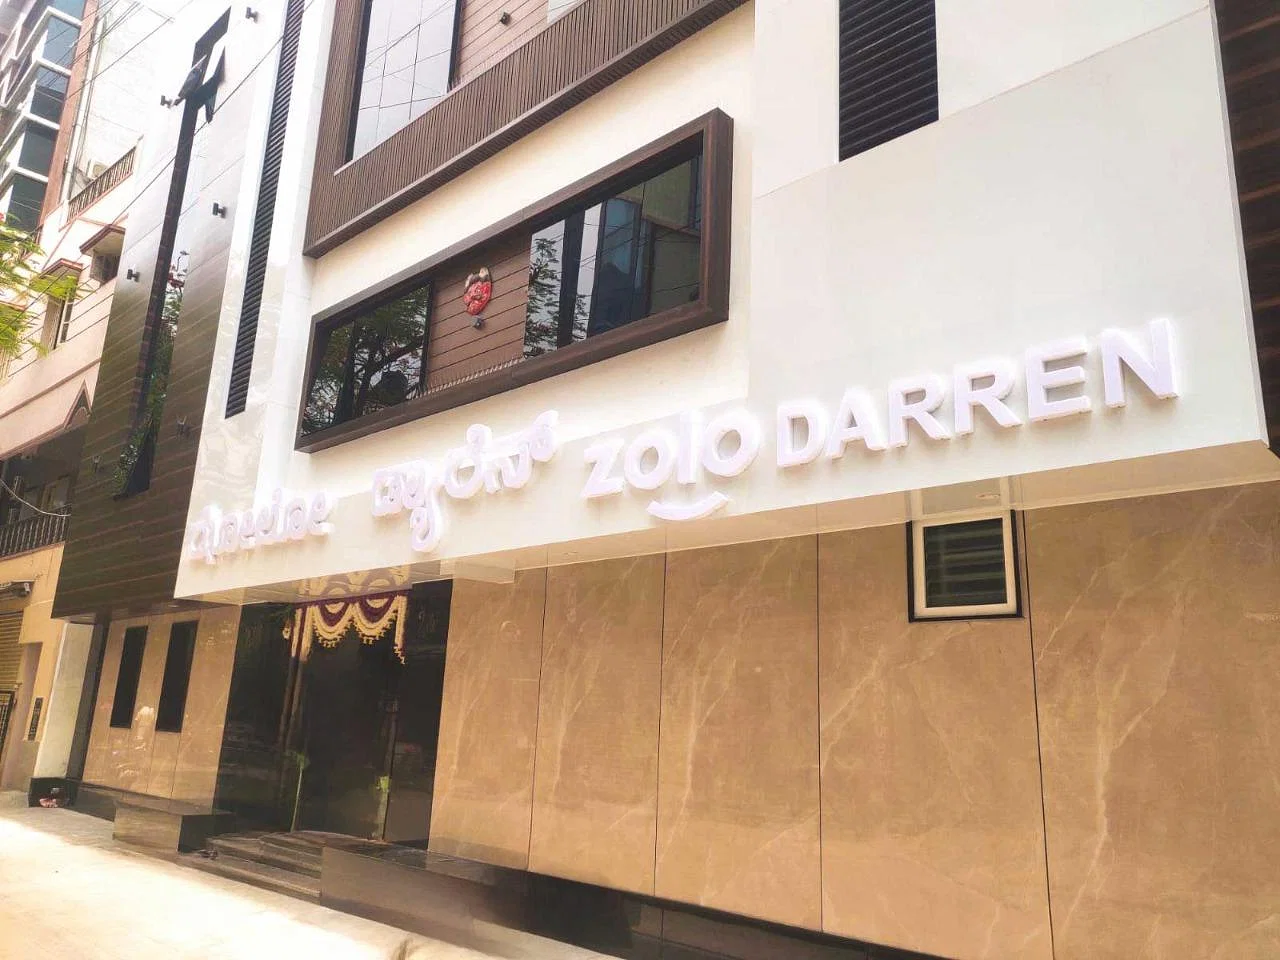 Fully furnished single/sharing rooms for rent in Maruthi Nagar with no brokerage-apply fast-Zolo Darren